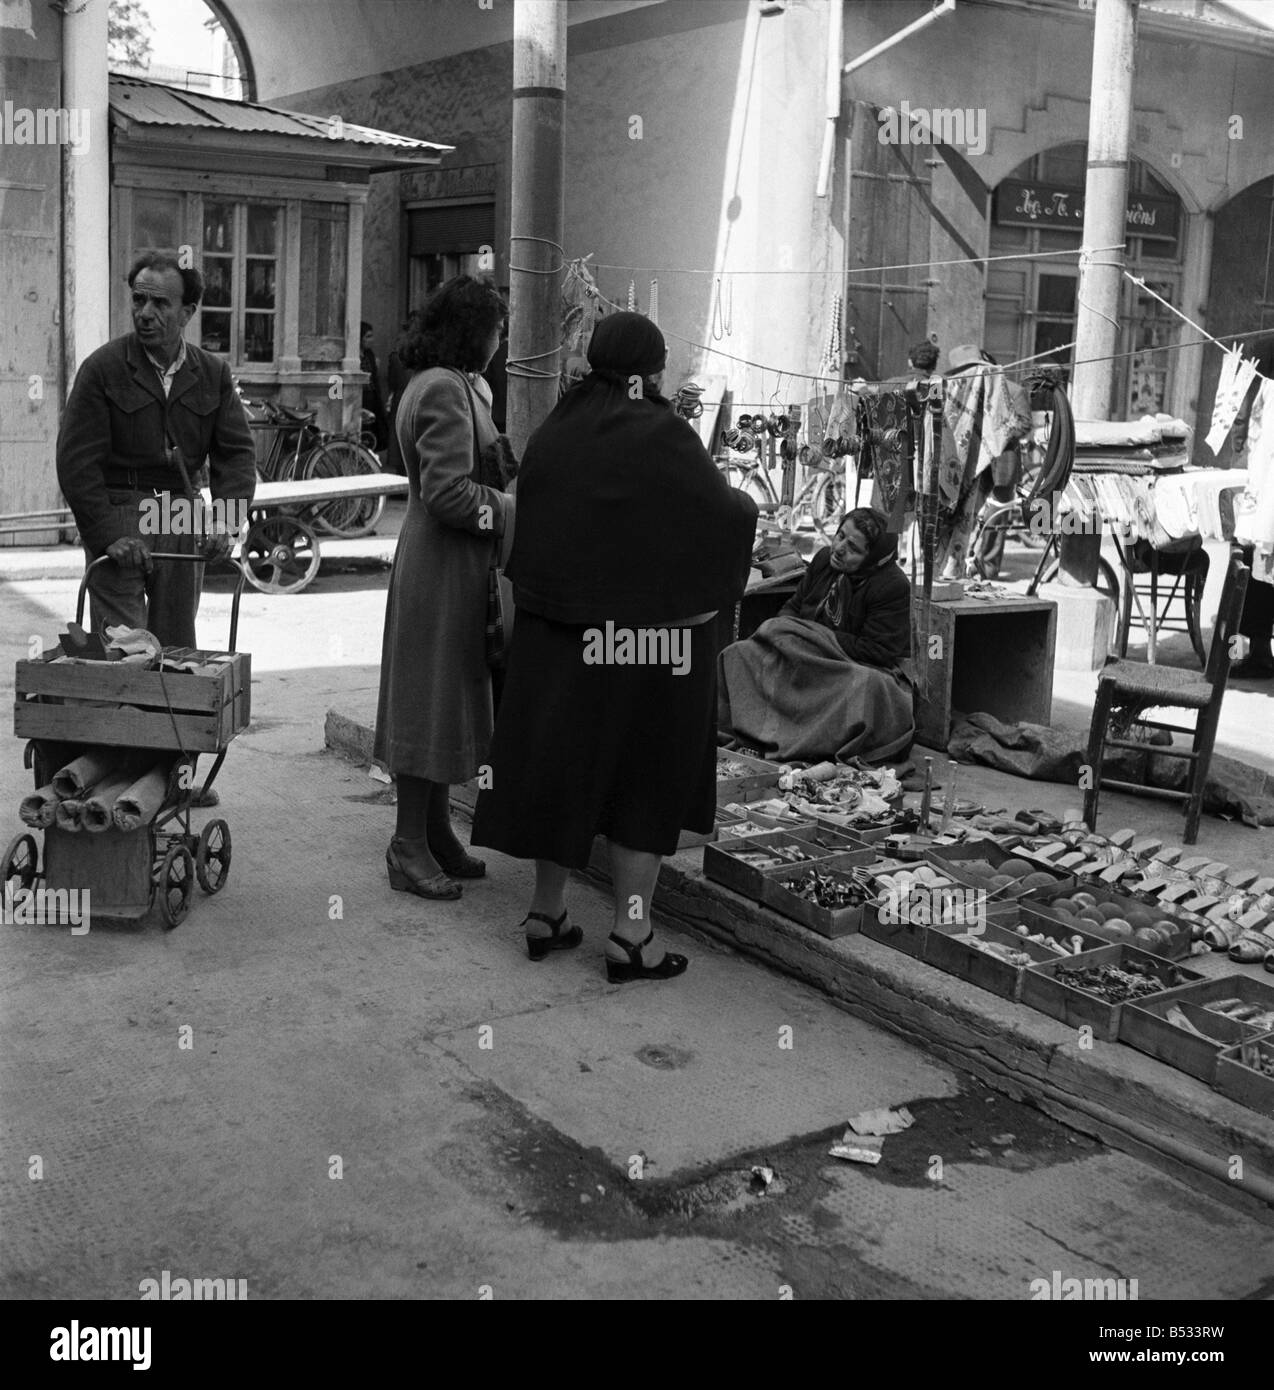 Traders at the Ladies Bazaar which opens every Friday in Nicosia, Cyprus,. The market sells items as diverse as lace, silk, embroideries, fruit and food. November 1952 C1105-003 Stock Photo